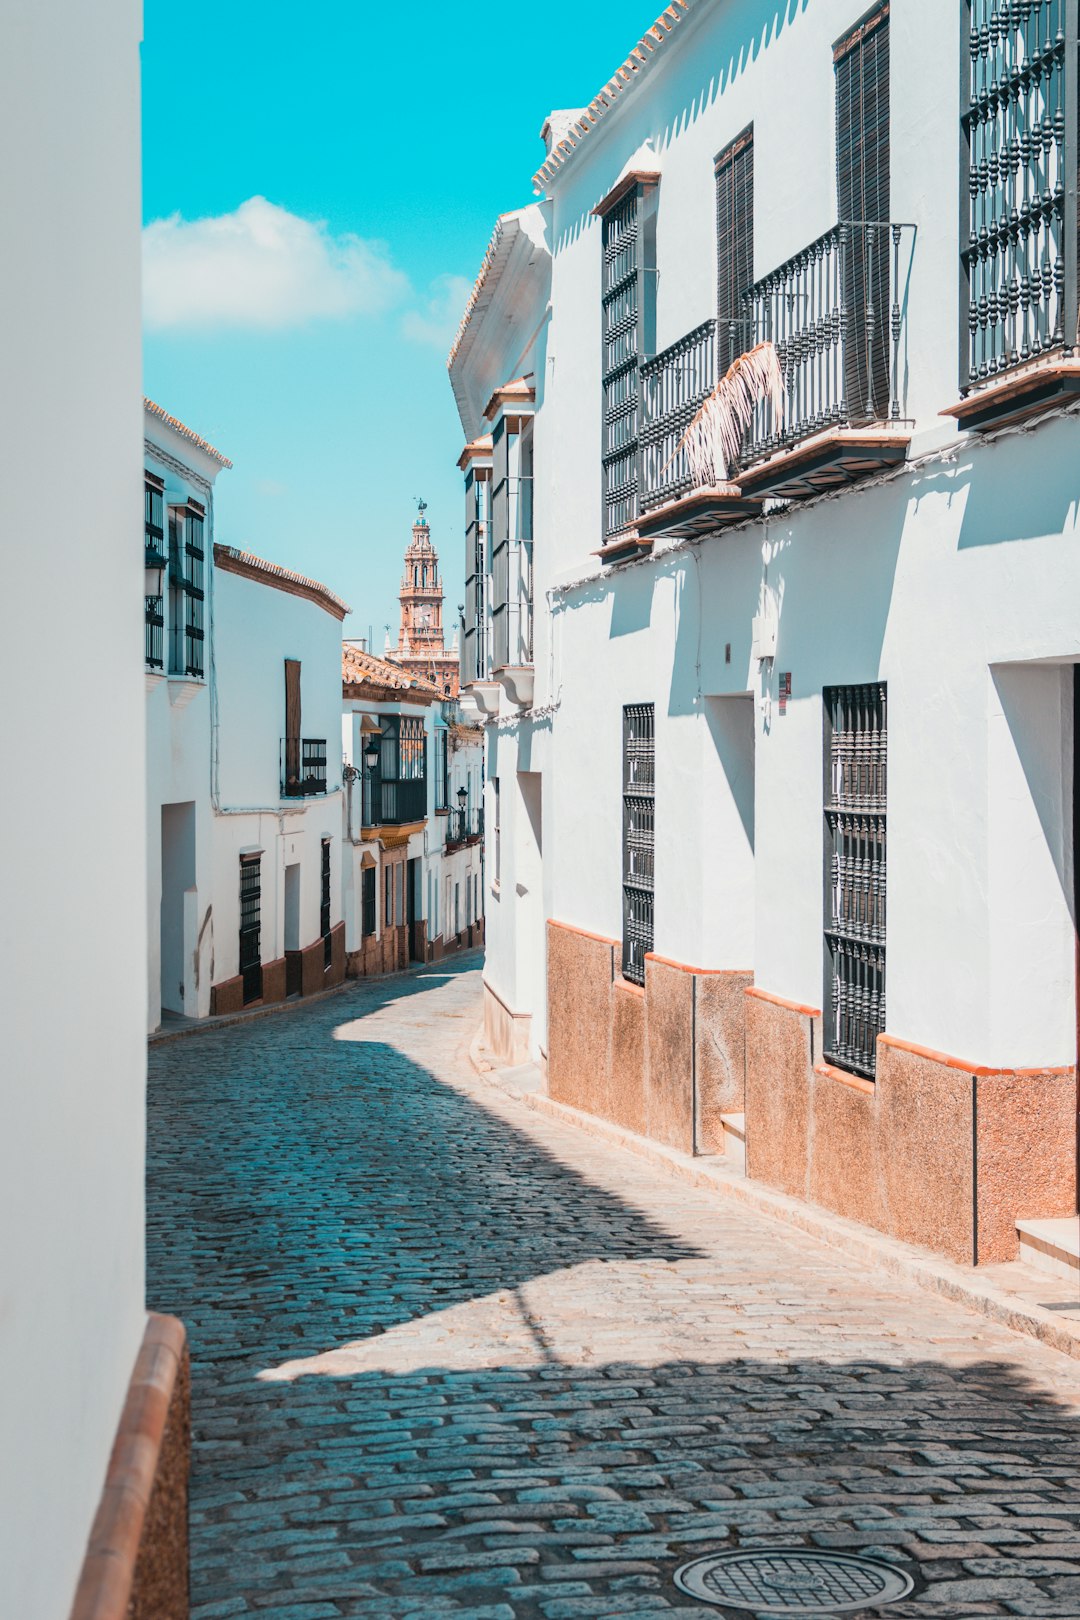 A small town of Andalusia, full of history.